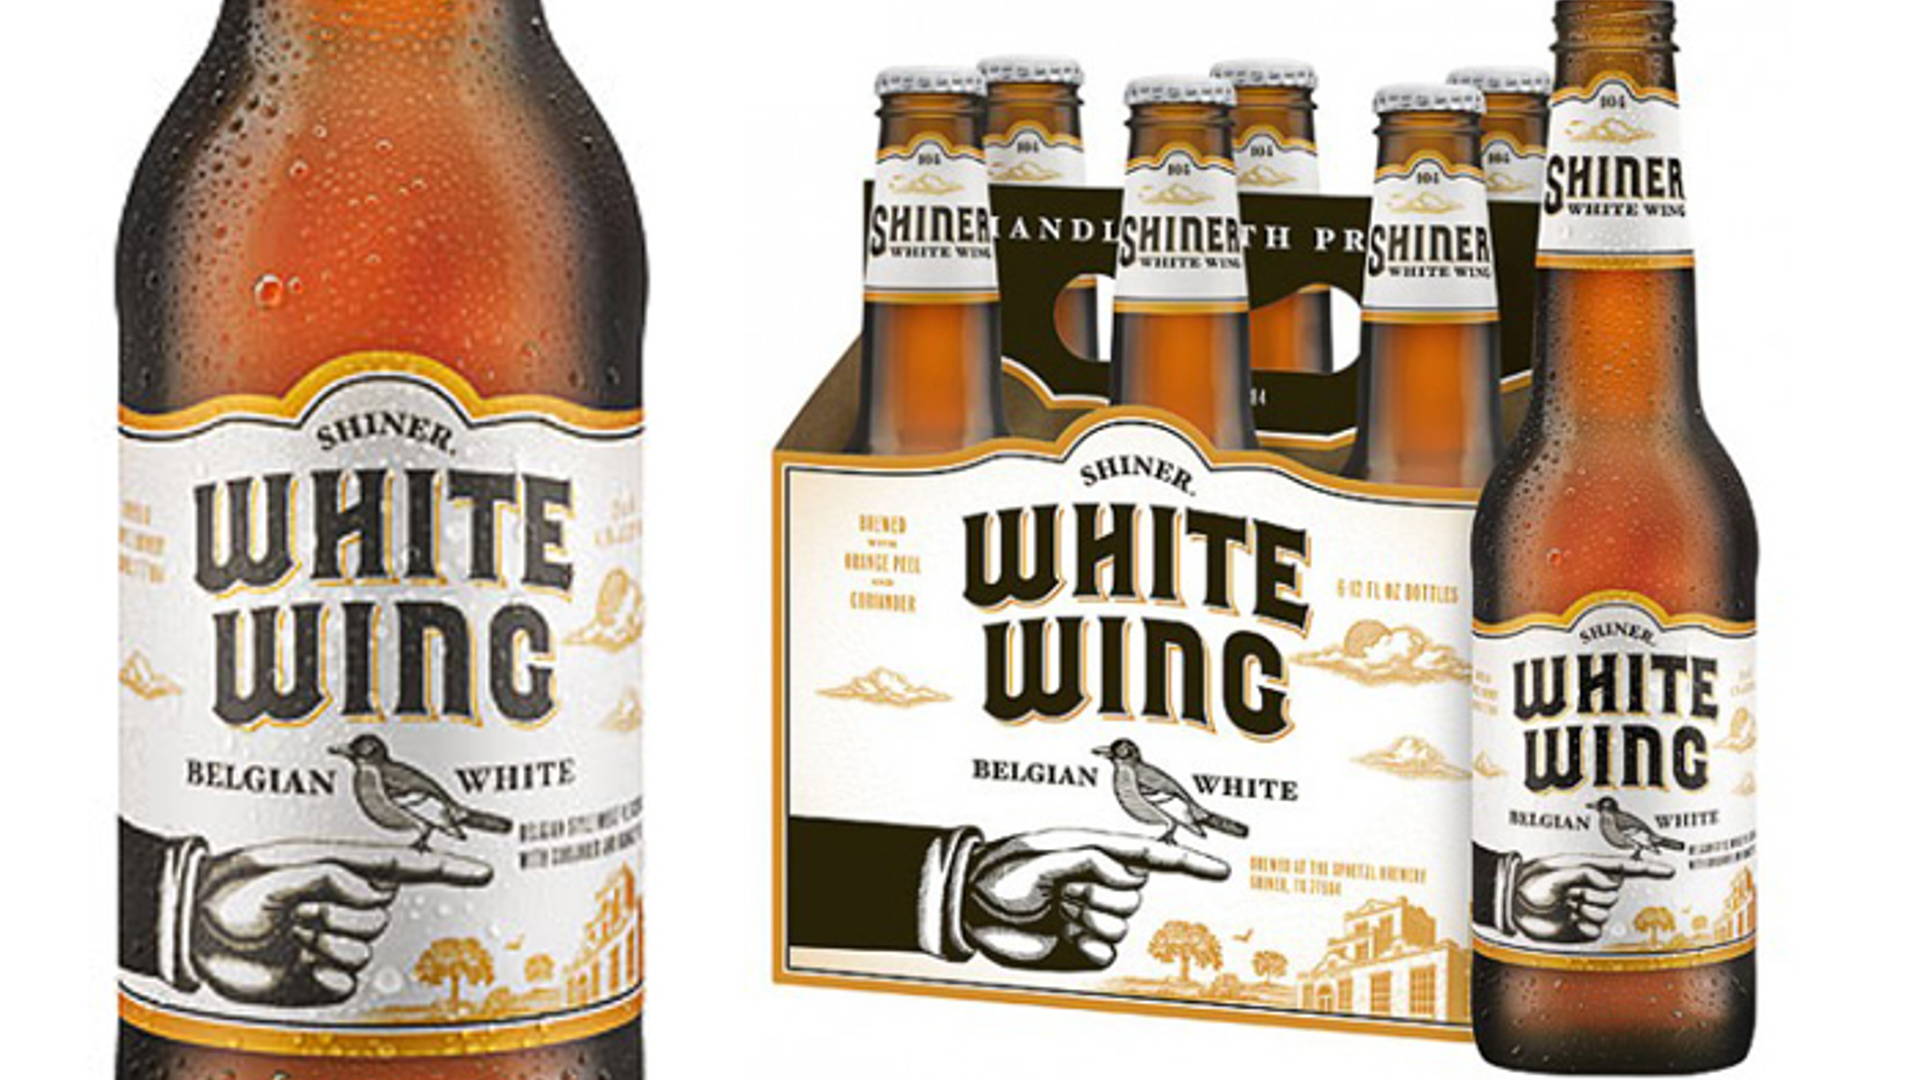 Featured image for Shiner White Wing